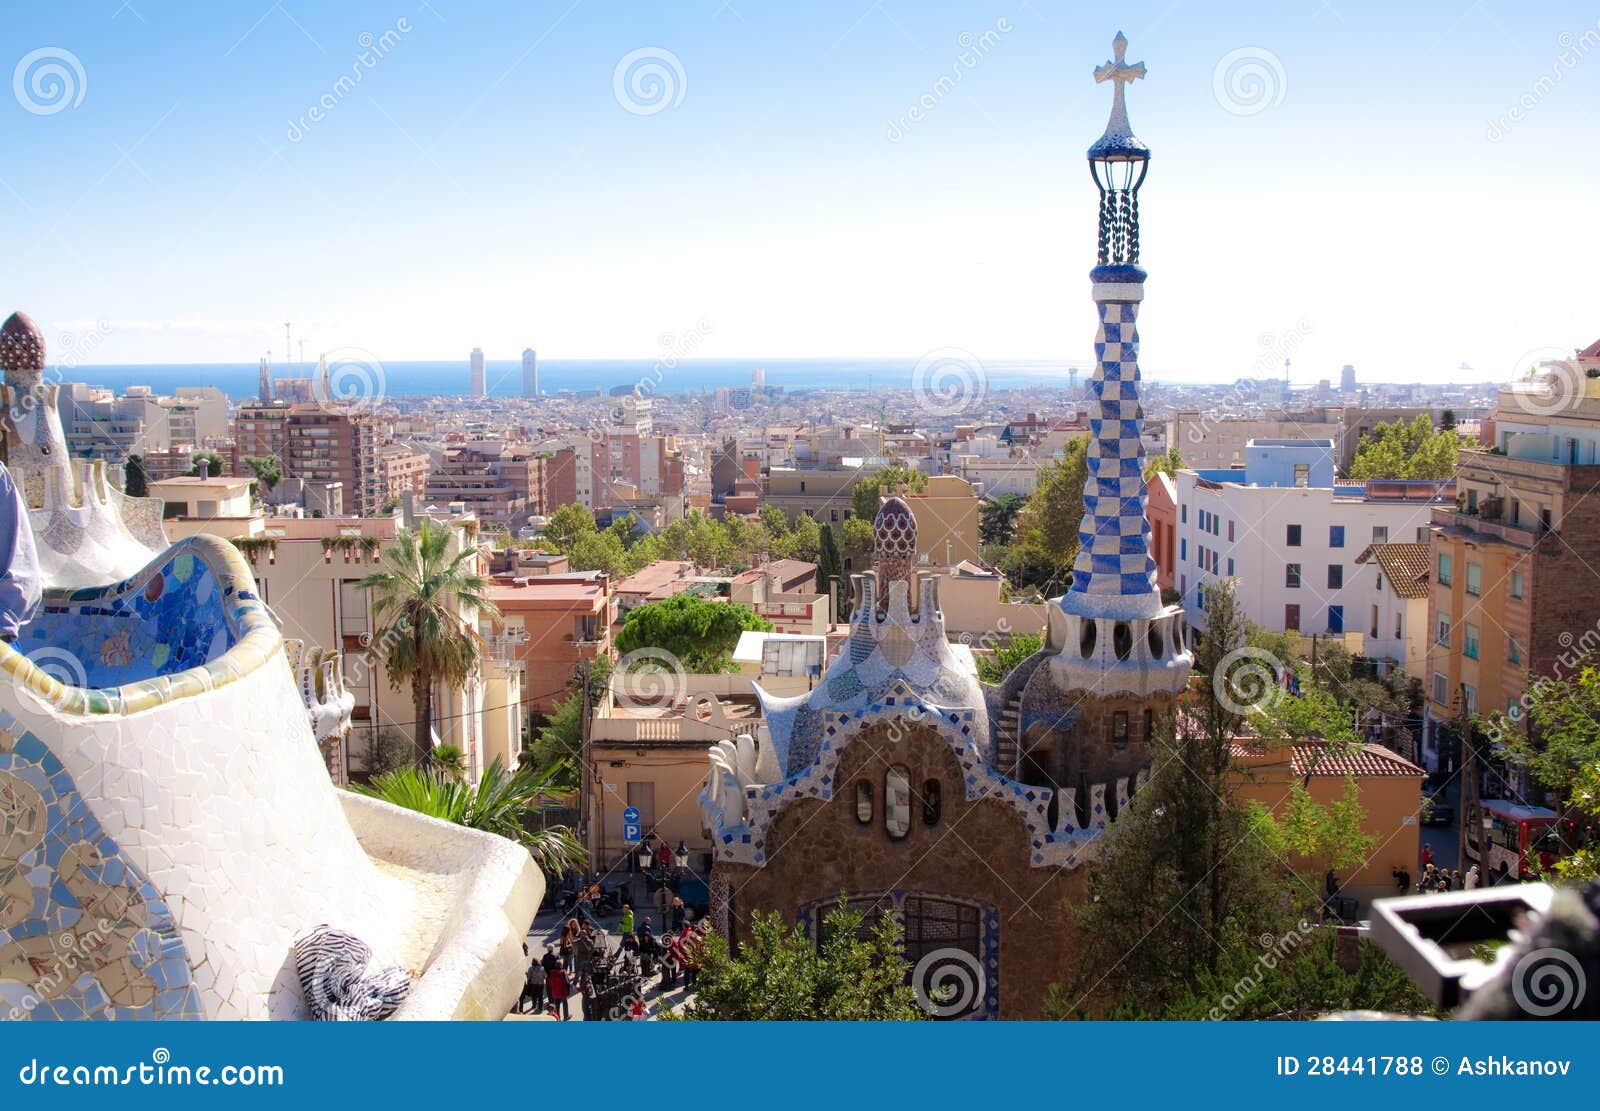 Barcelona landscape view stock photo. Image of colored - 28441788